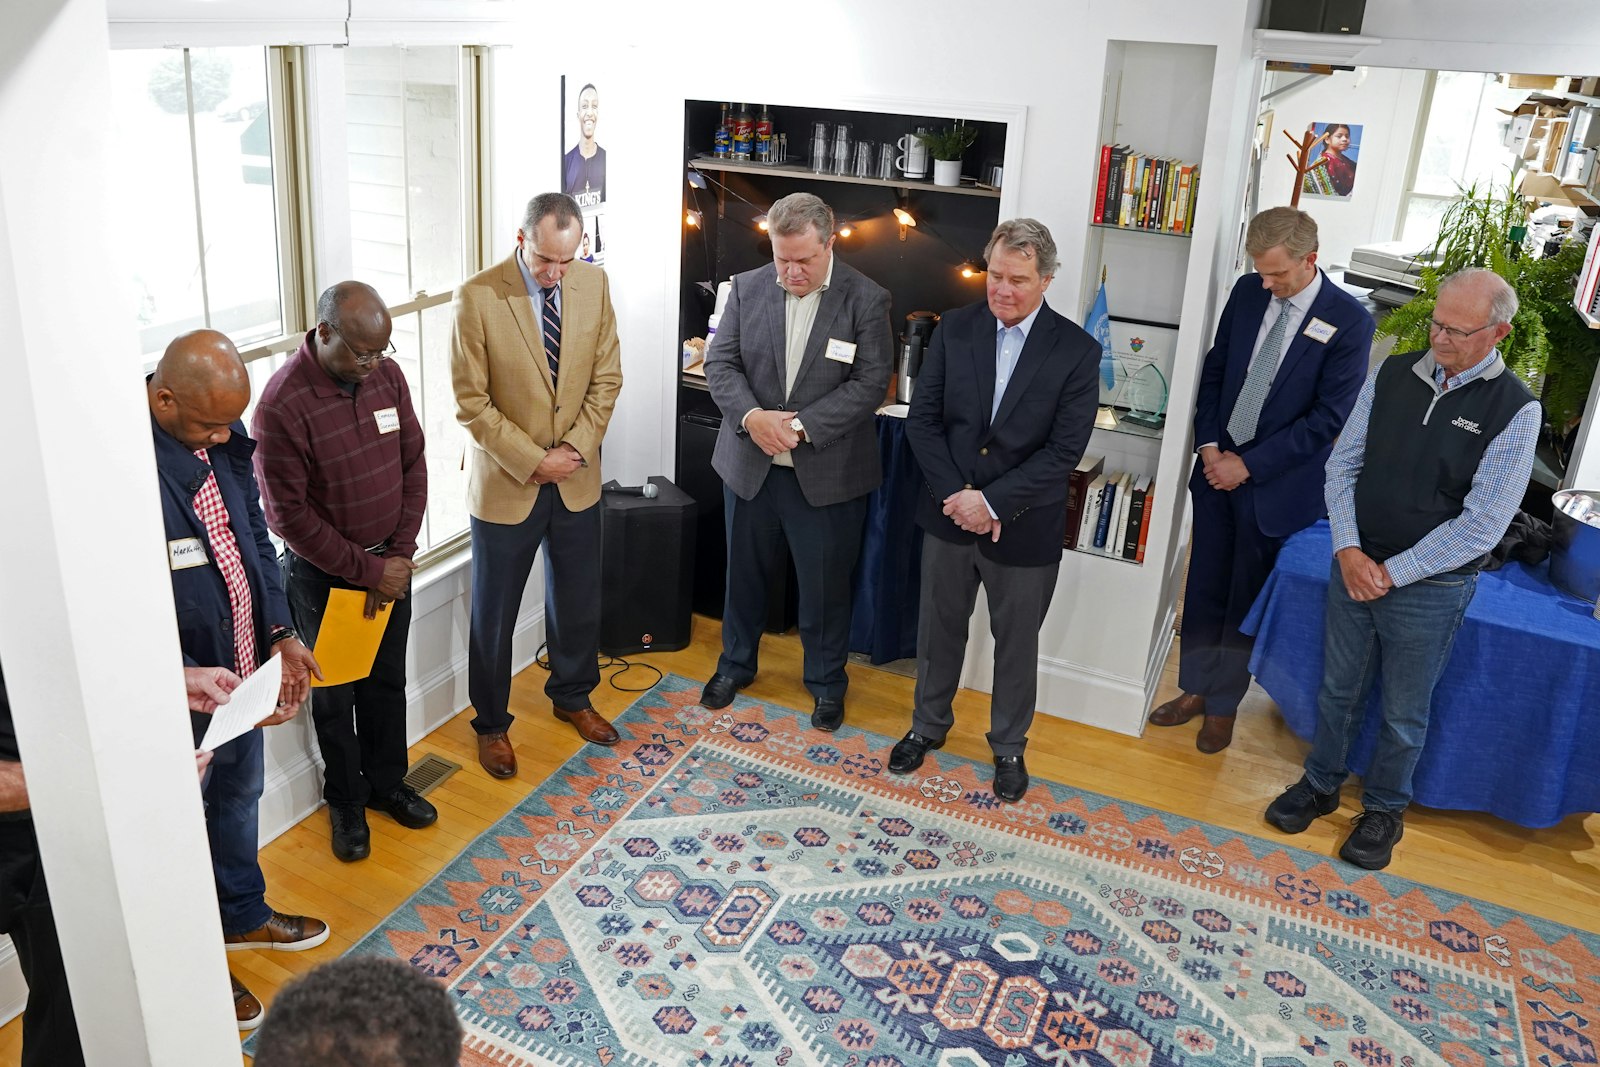 International Samaritan board members and supporters pray during a flag-raising ceremony April 28 outside the nonprofit's Ann Arbor headquarters to mark its expansion in east Africa.